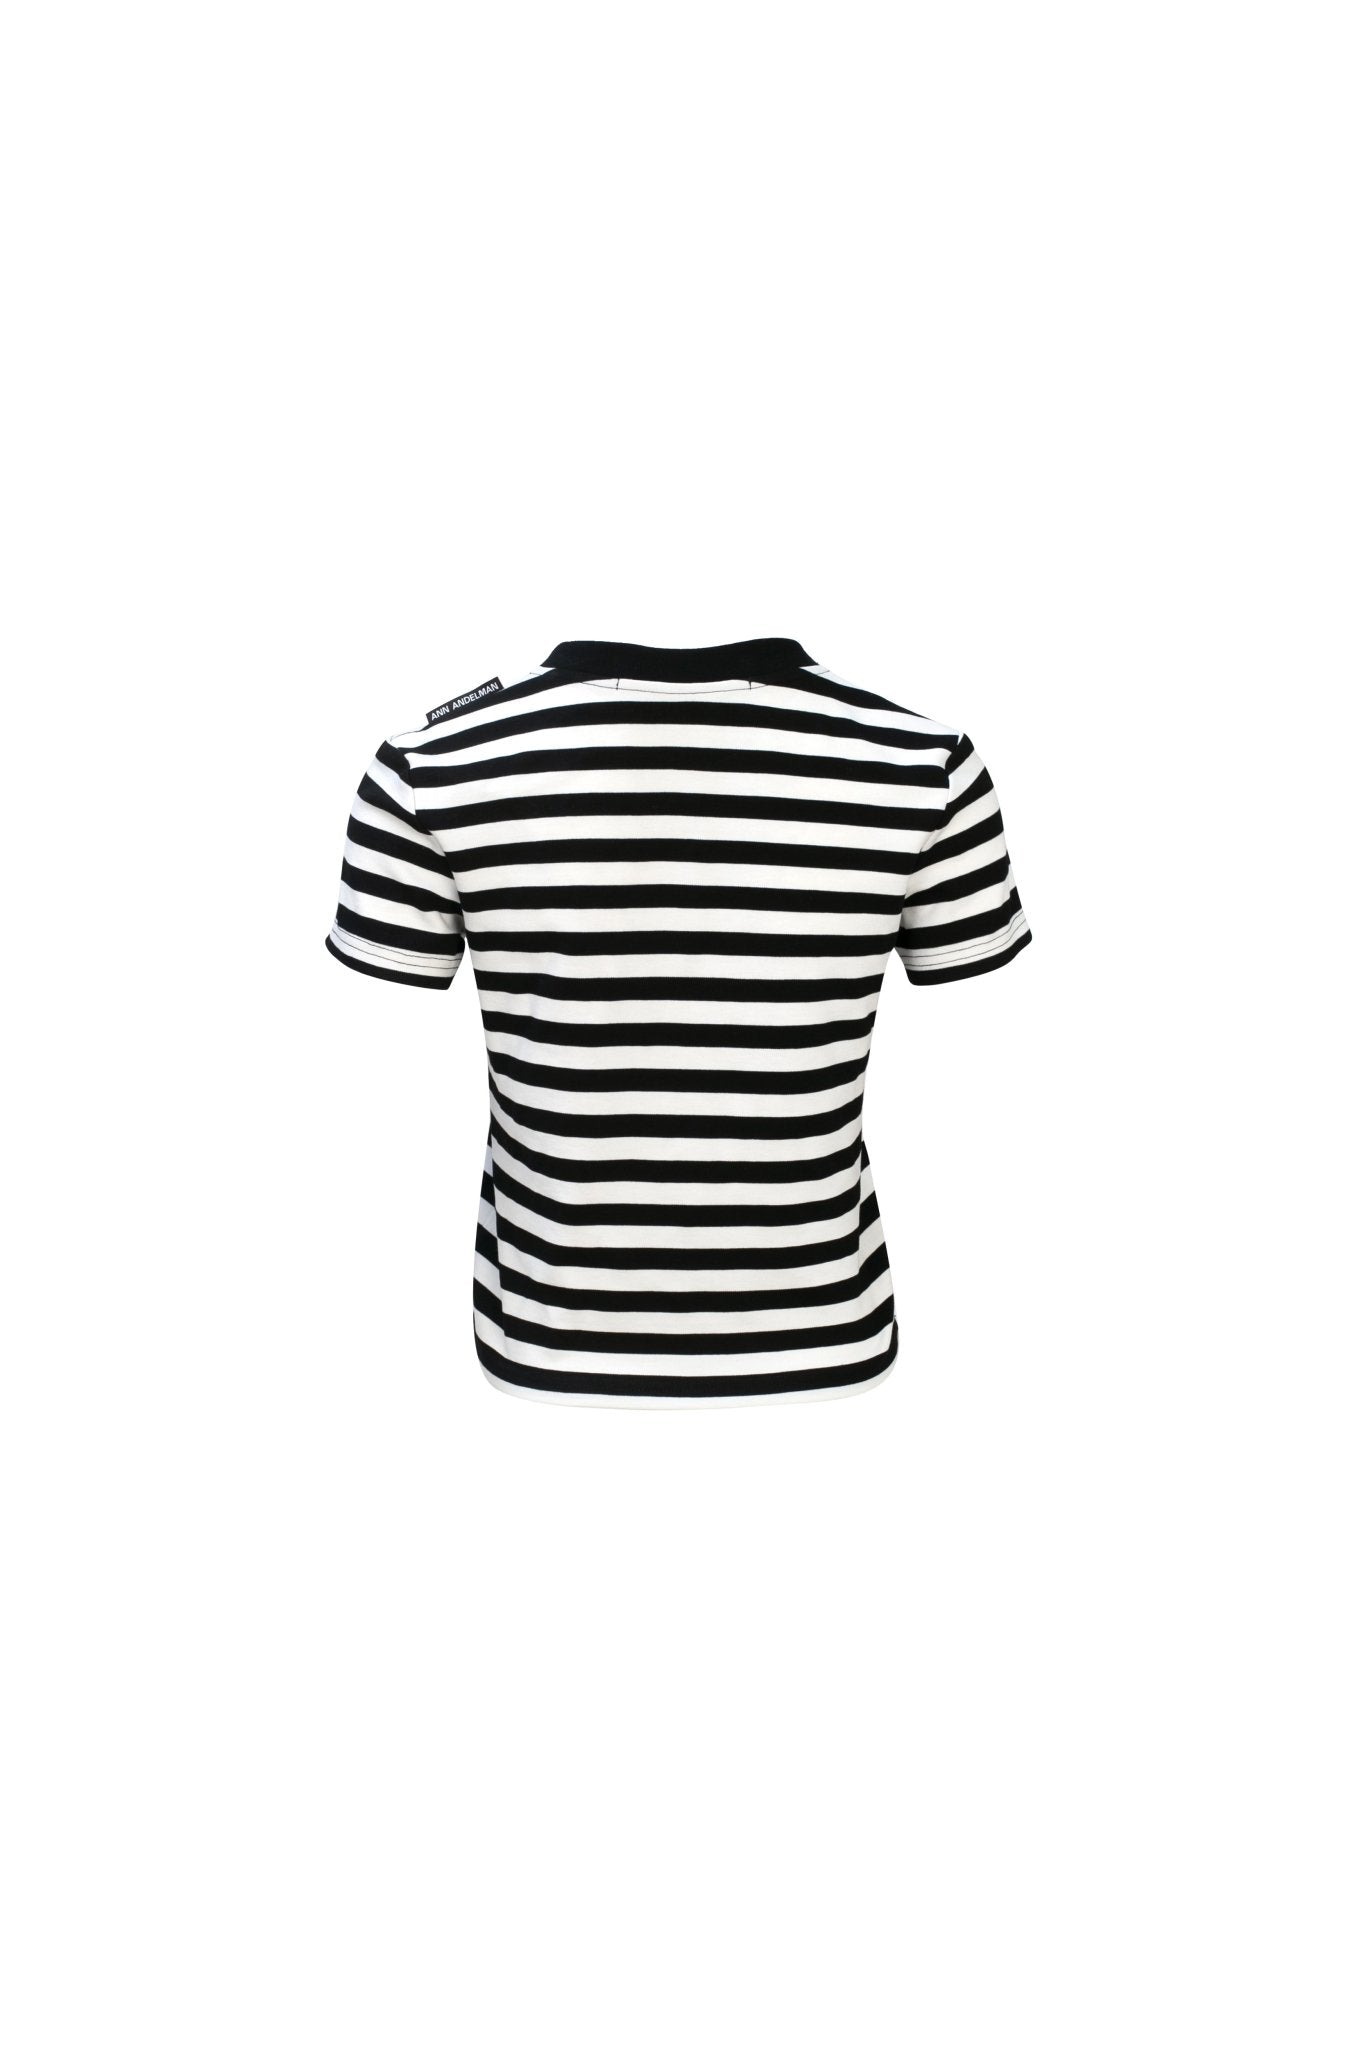 ANN ANDELMAN Printed Striped Short Sleeve Top (Black and White Striped) | MADA IN CHINA